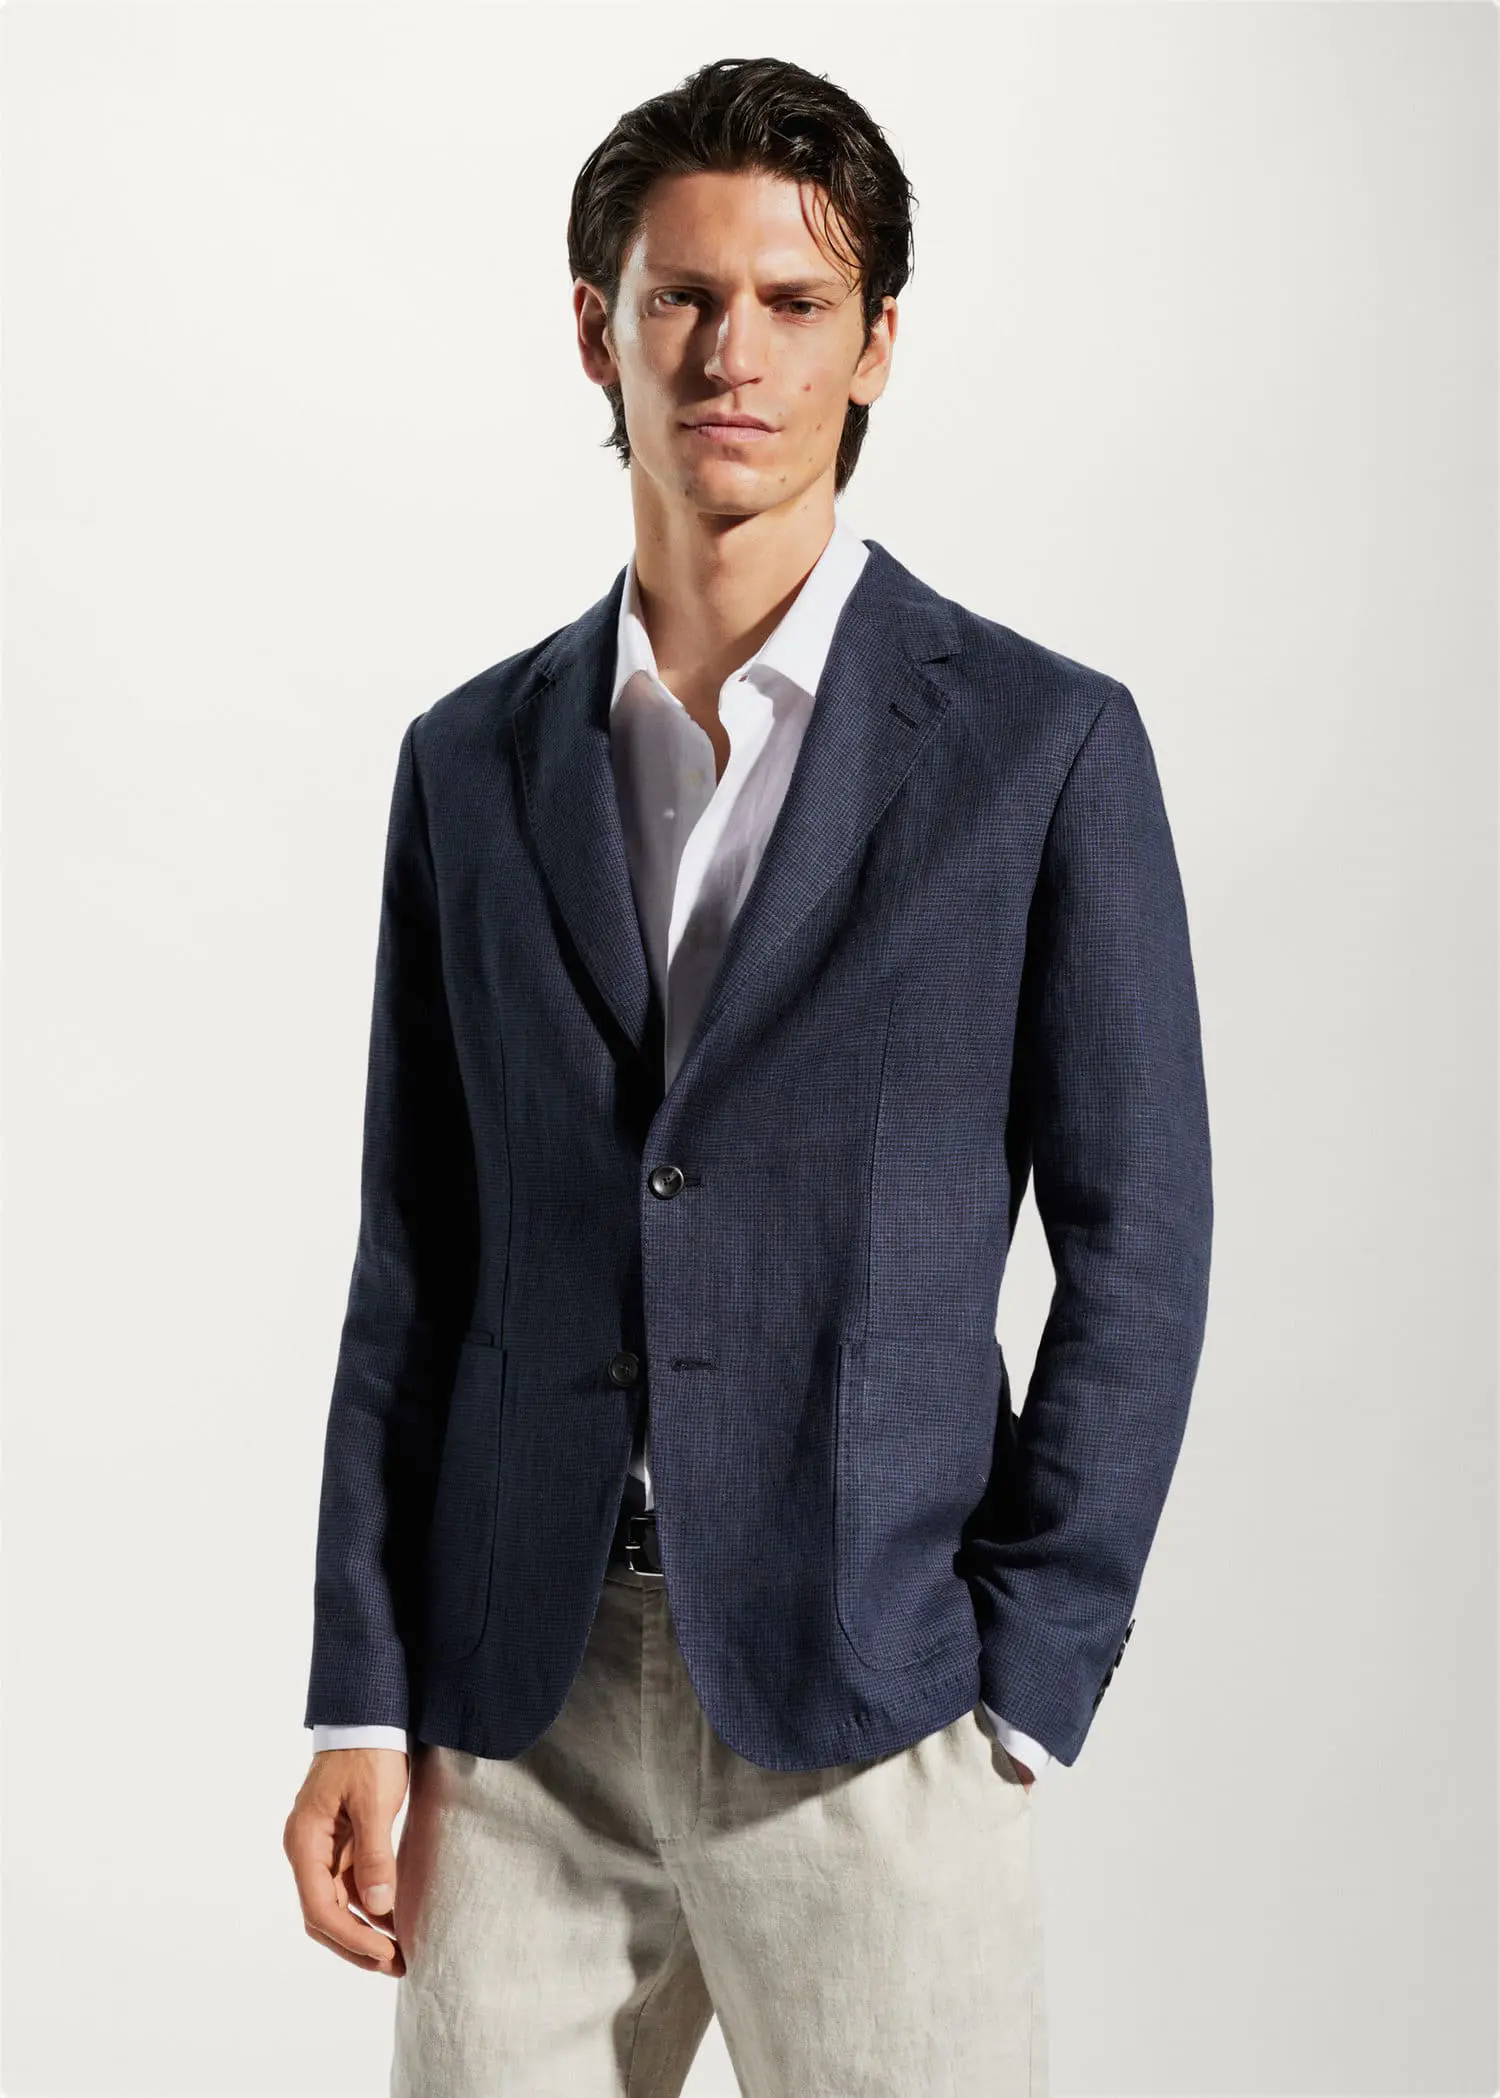 Mango 100% linen micro-houndstooth blazer. a man wearing a suit and a white shirt. 